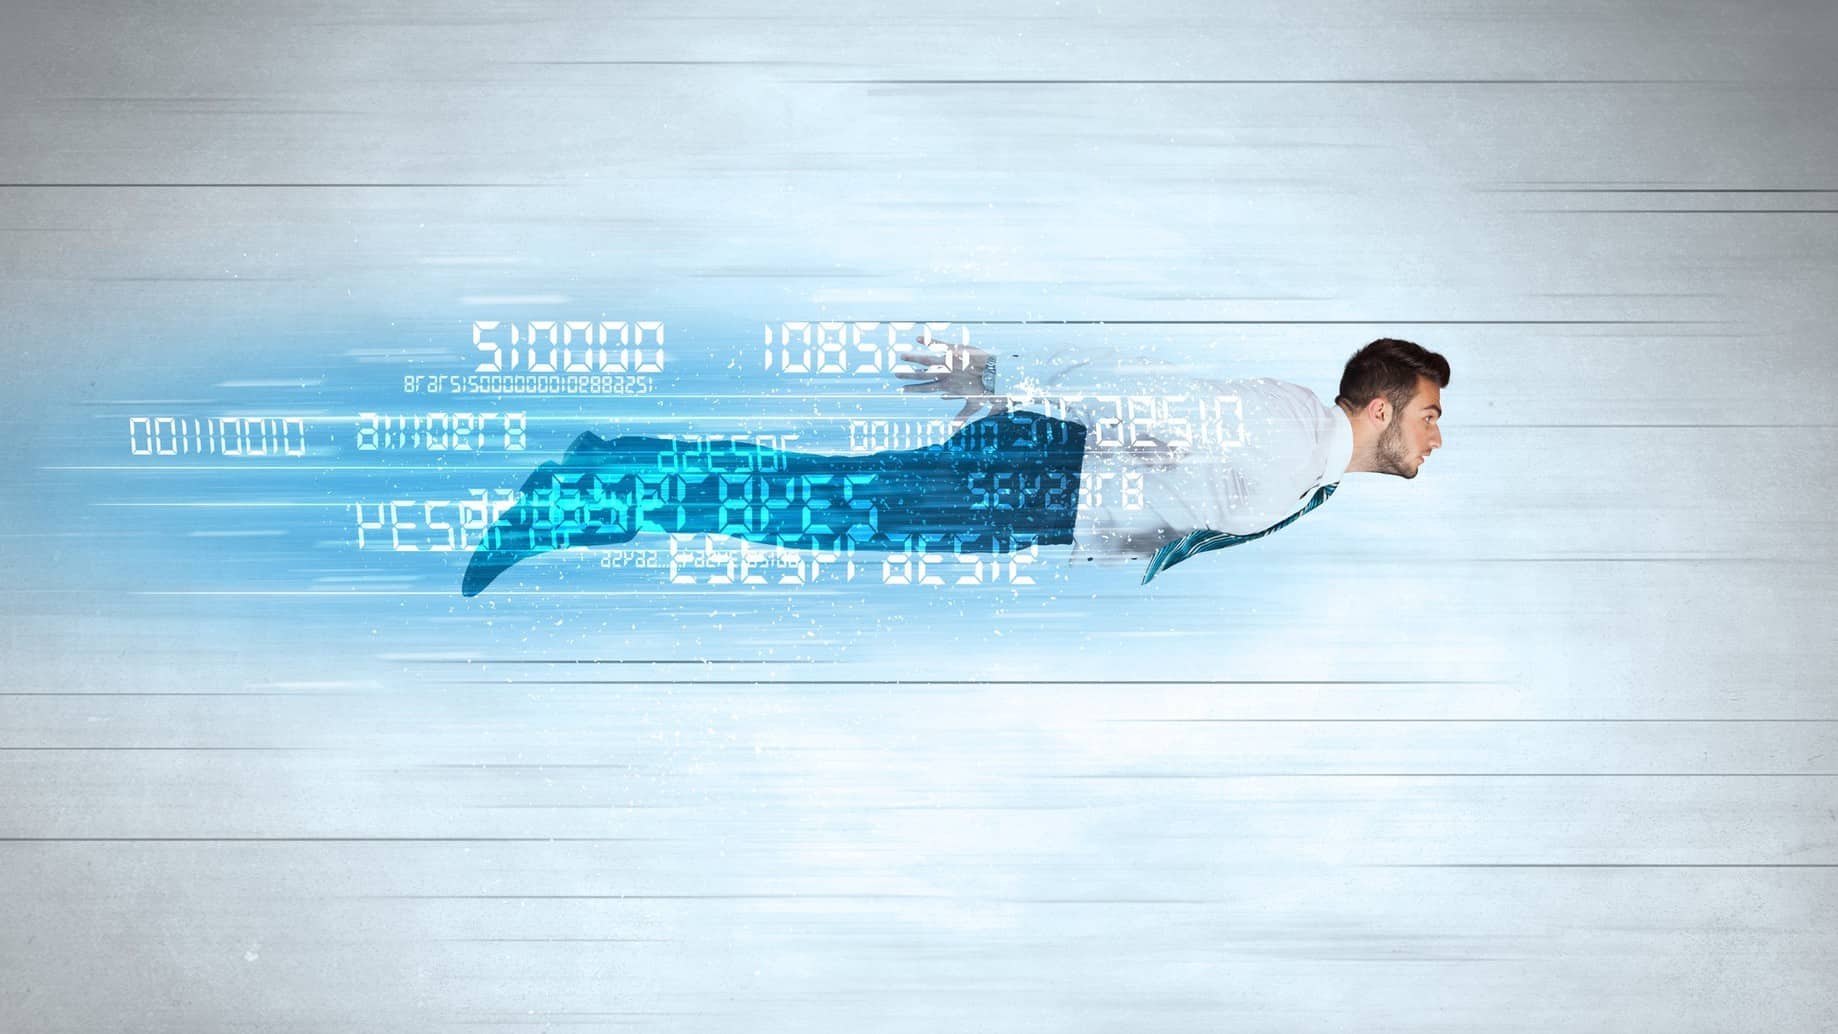 A man flies fast through a digital space with numbers all around him.